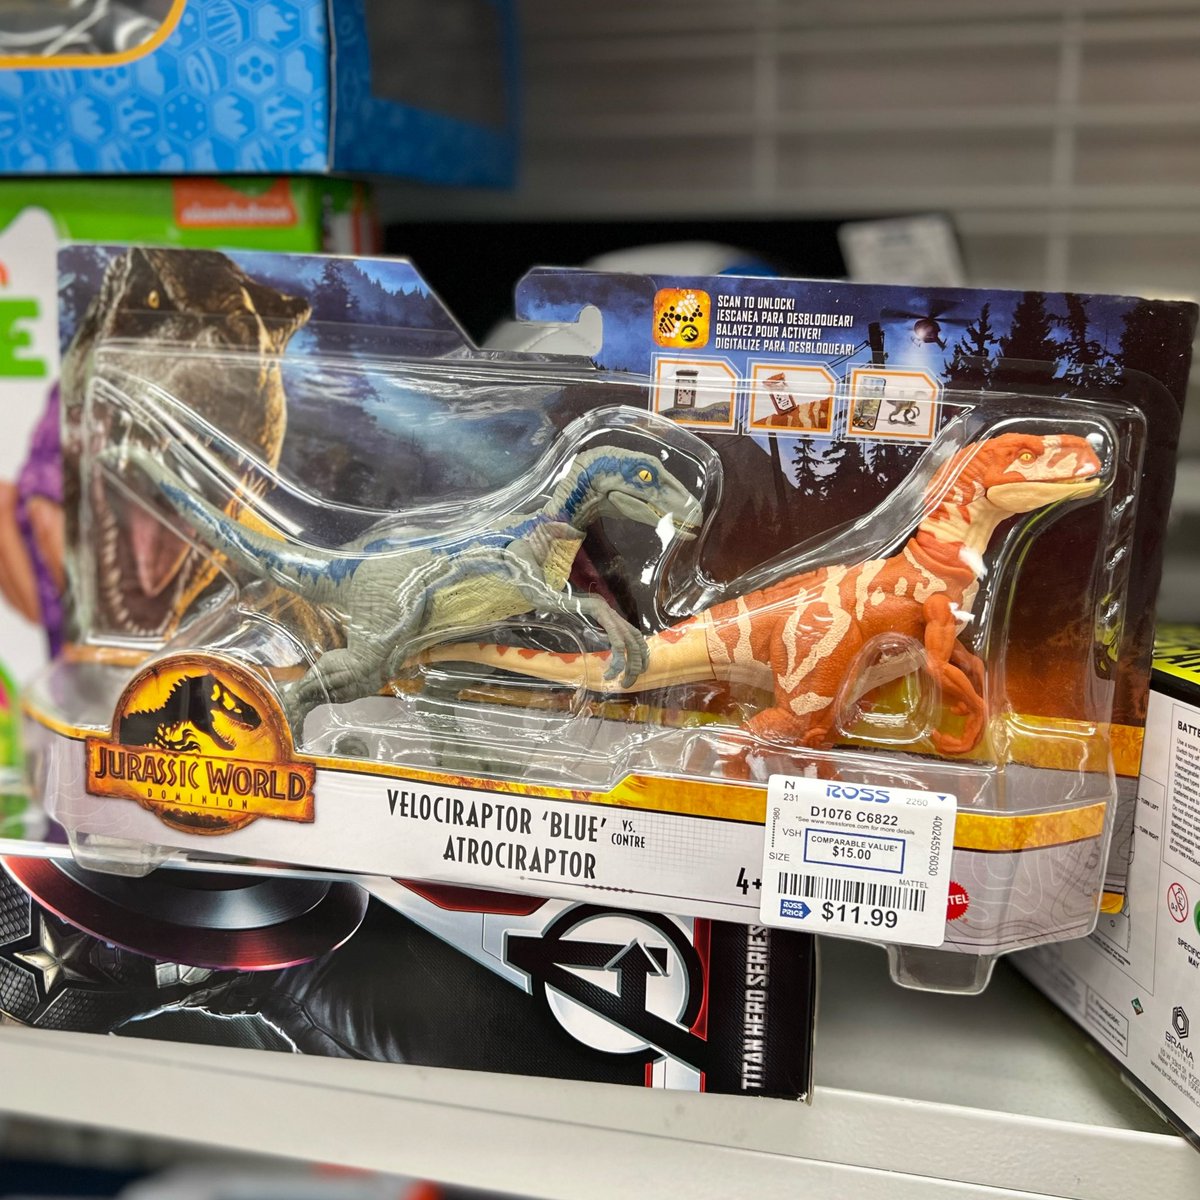 ROSSIRAPTOR! Look what’s showing up at @rossdressforless — that “cancelled” Jurassic World Dominion 2-Pack with Velociraptor Blue and Atrociraptor Red. Originally available to order online, this set seems to have been moved to liquidation at discount stores instead.

1/2